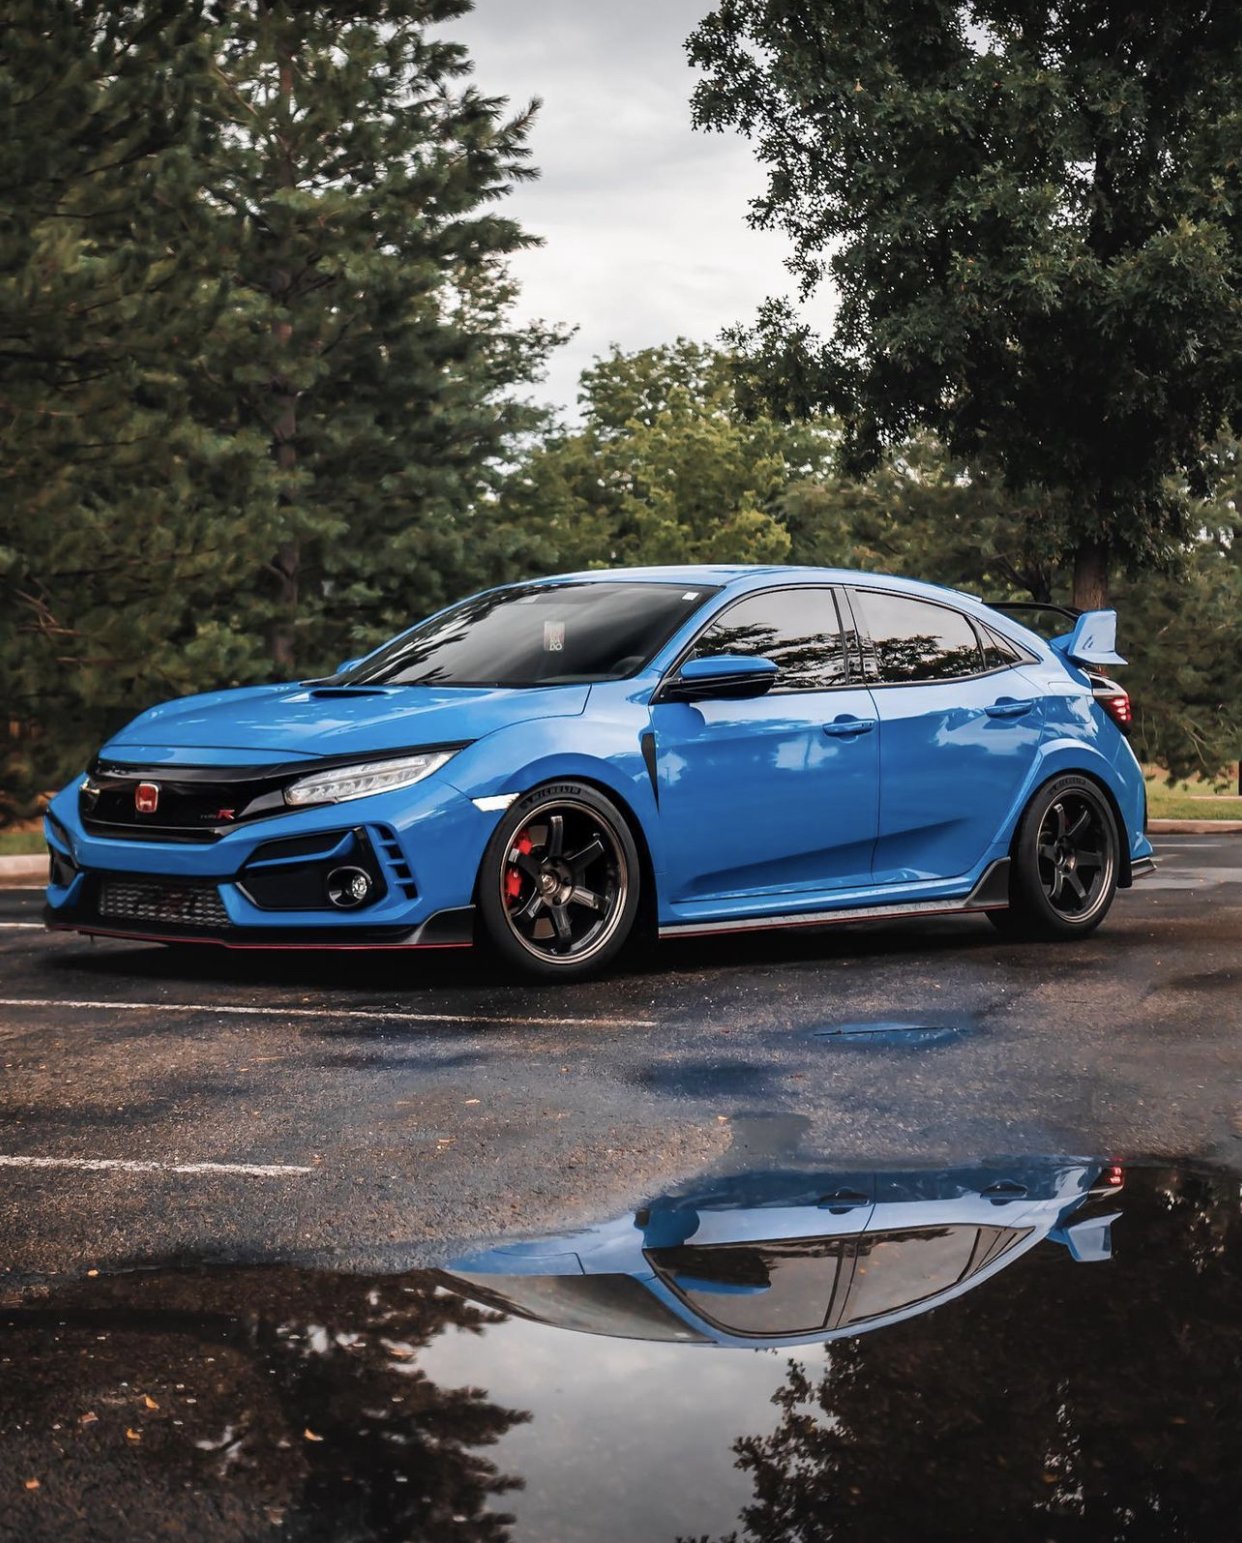 Boost Blue FK8 Honda Civic Type R equipped with systemspec Rays Volk